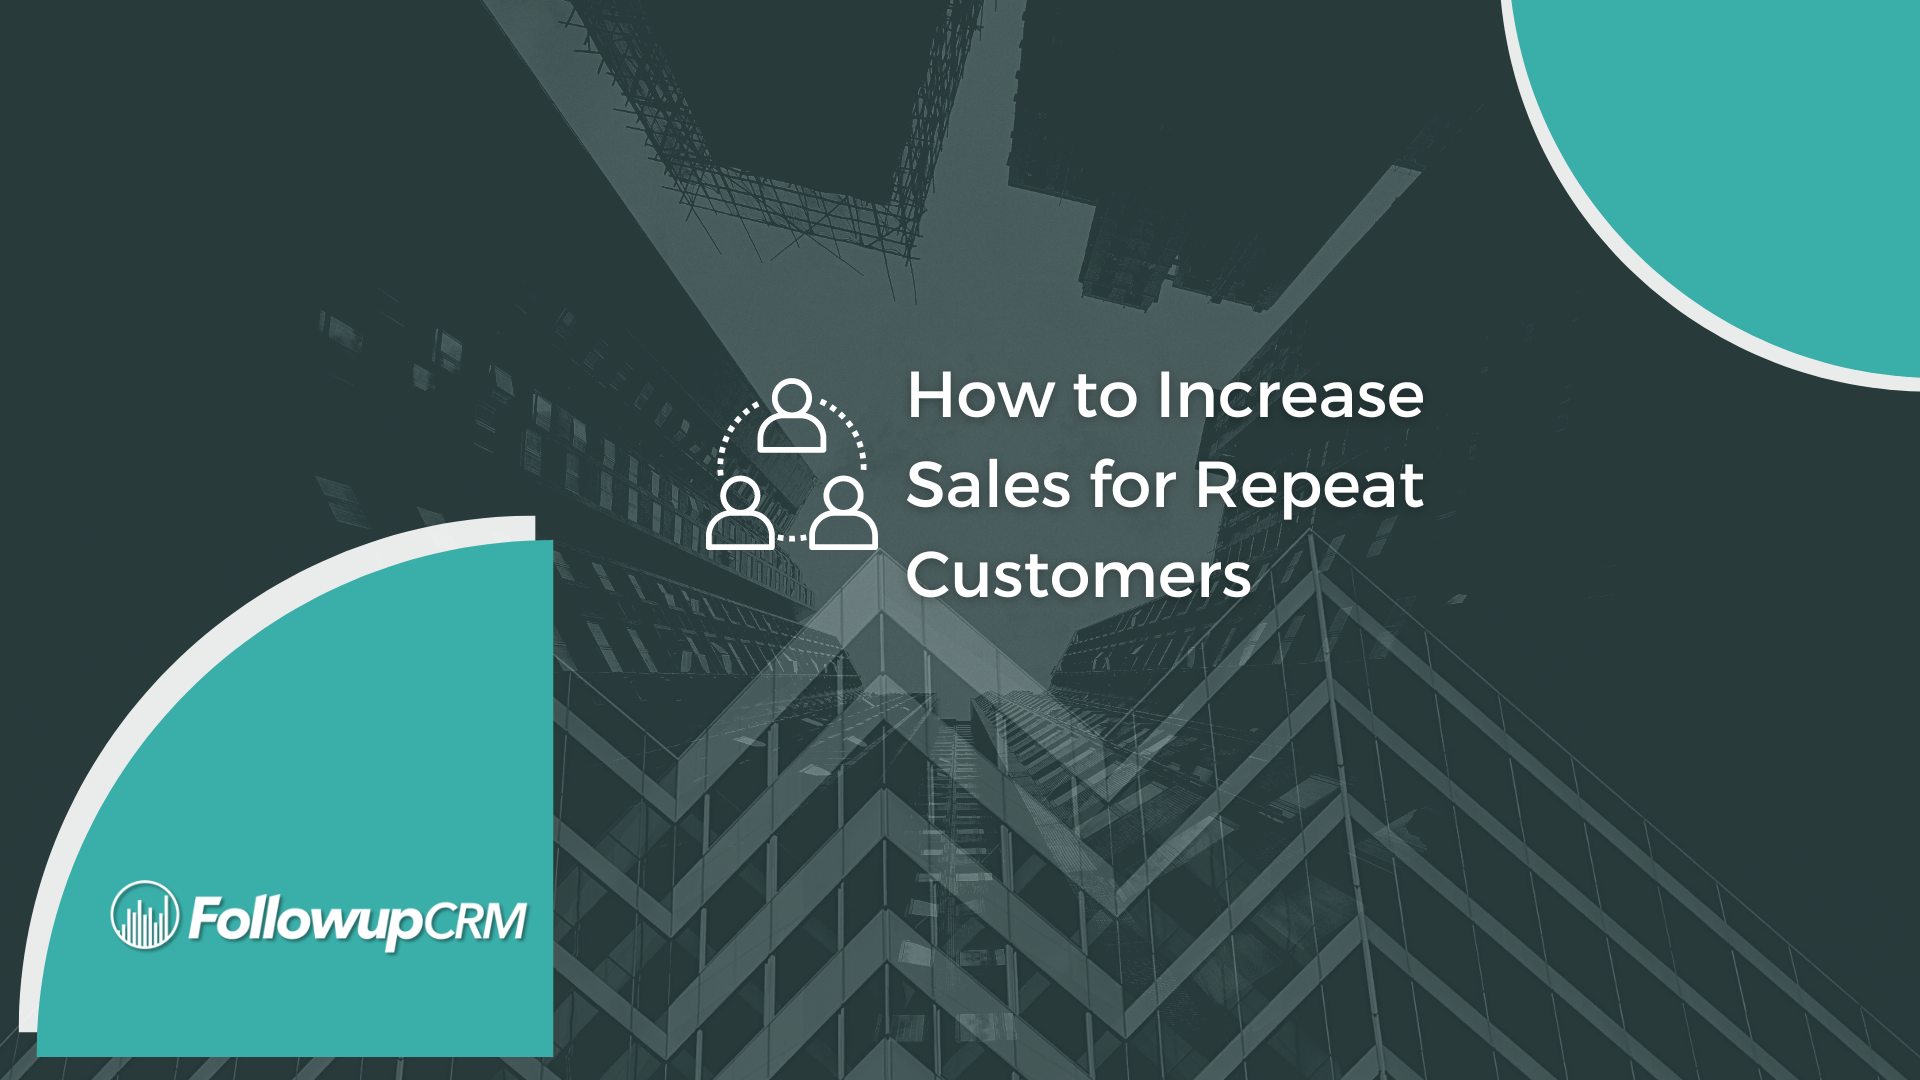 How to Increase Sales for Repeat Customers